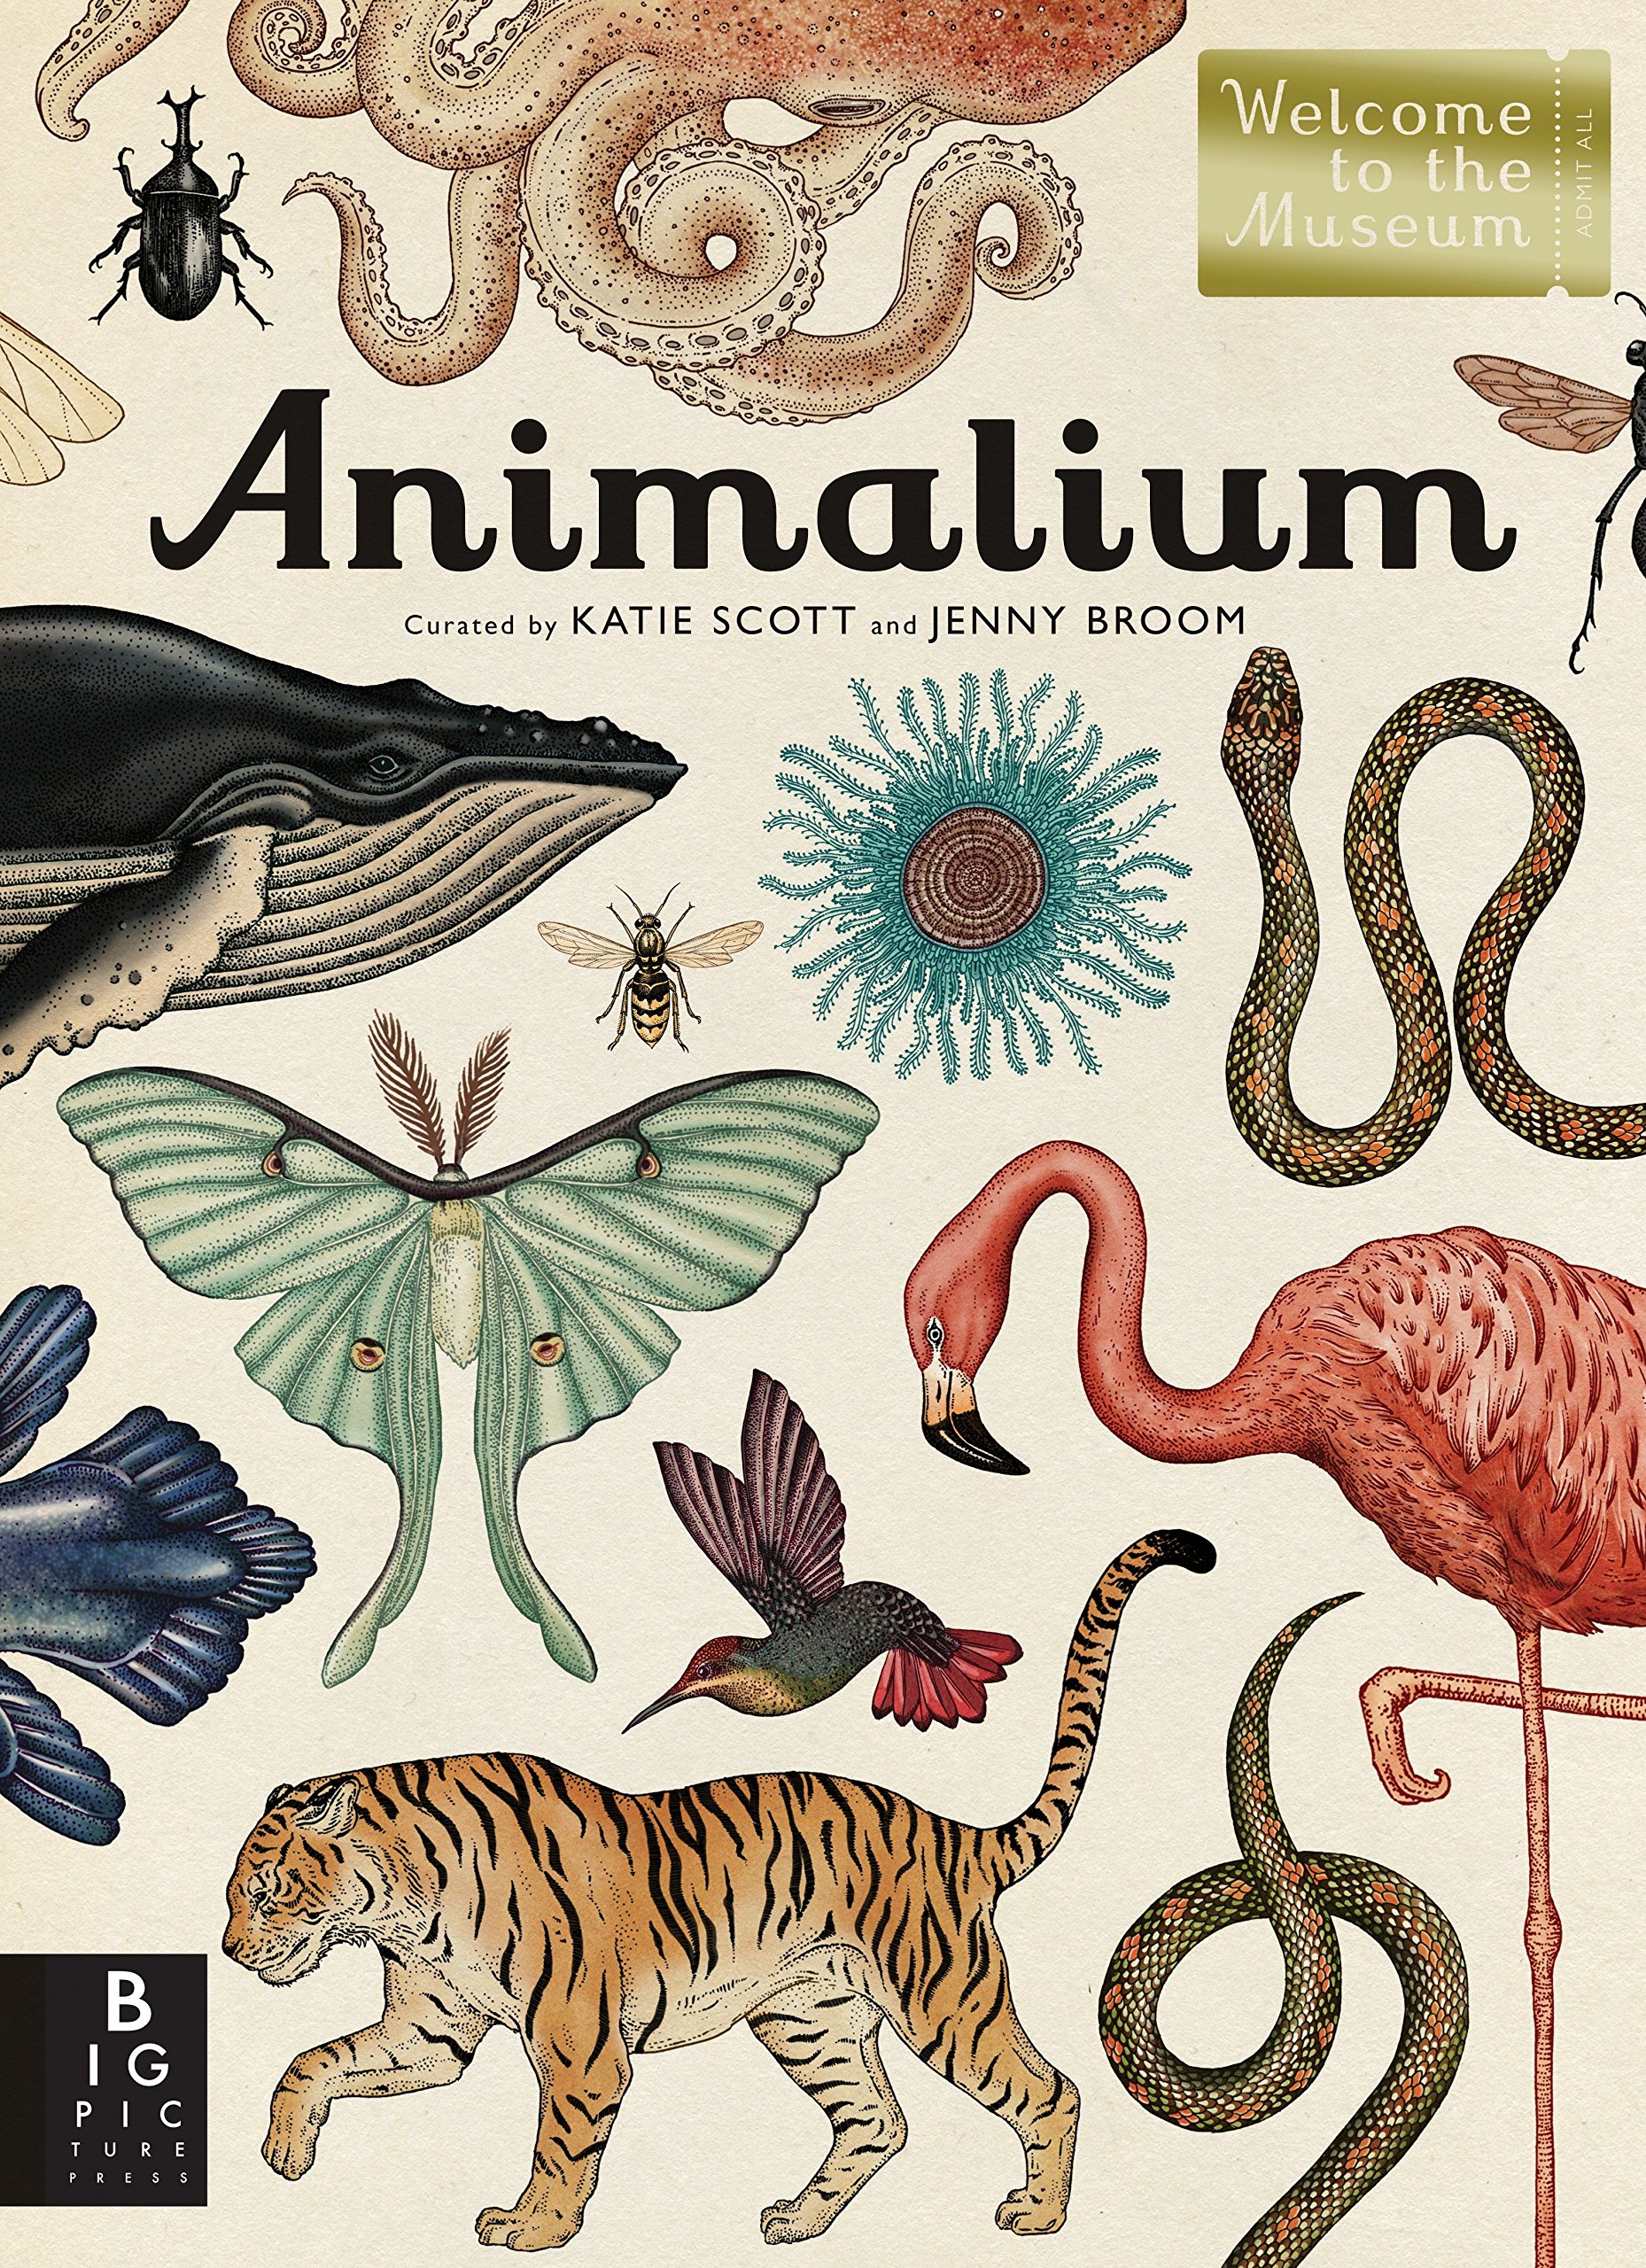 LIGHTNING DEAL ALERT! Animalium: Welcome to the Museum 55% off!